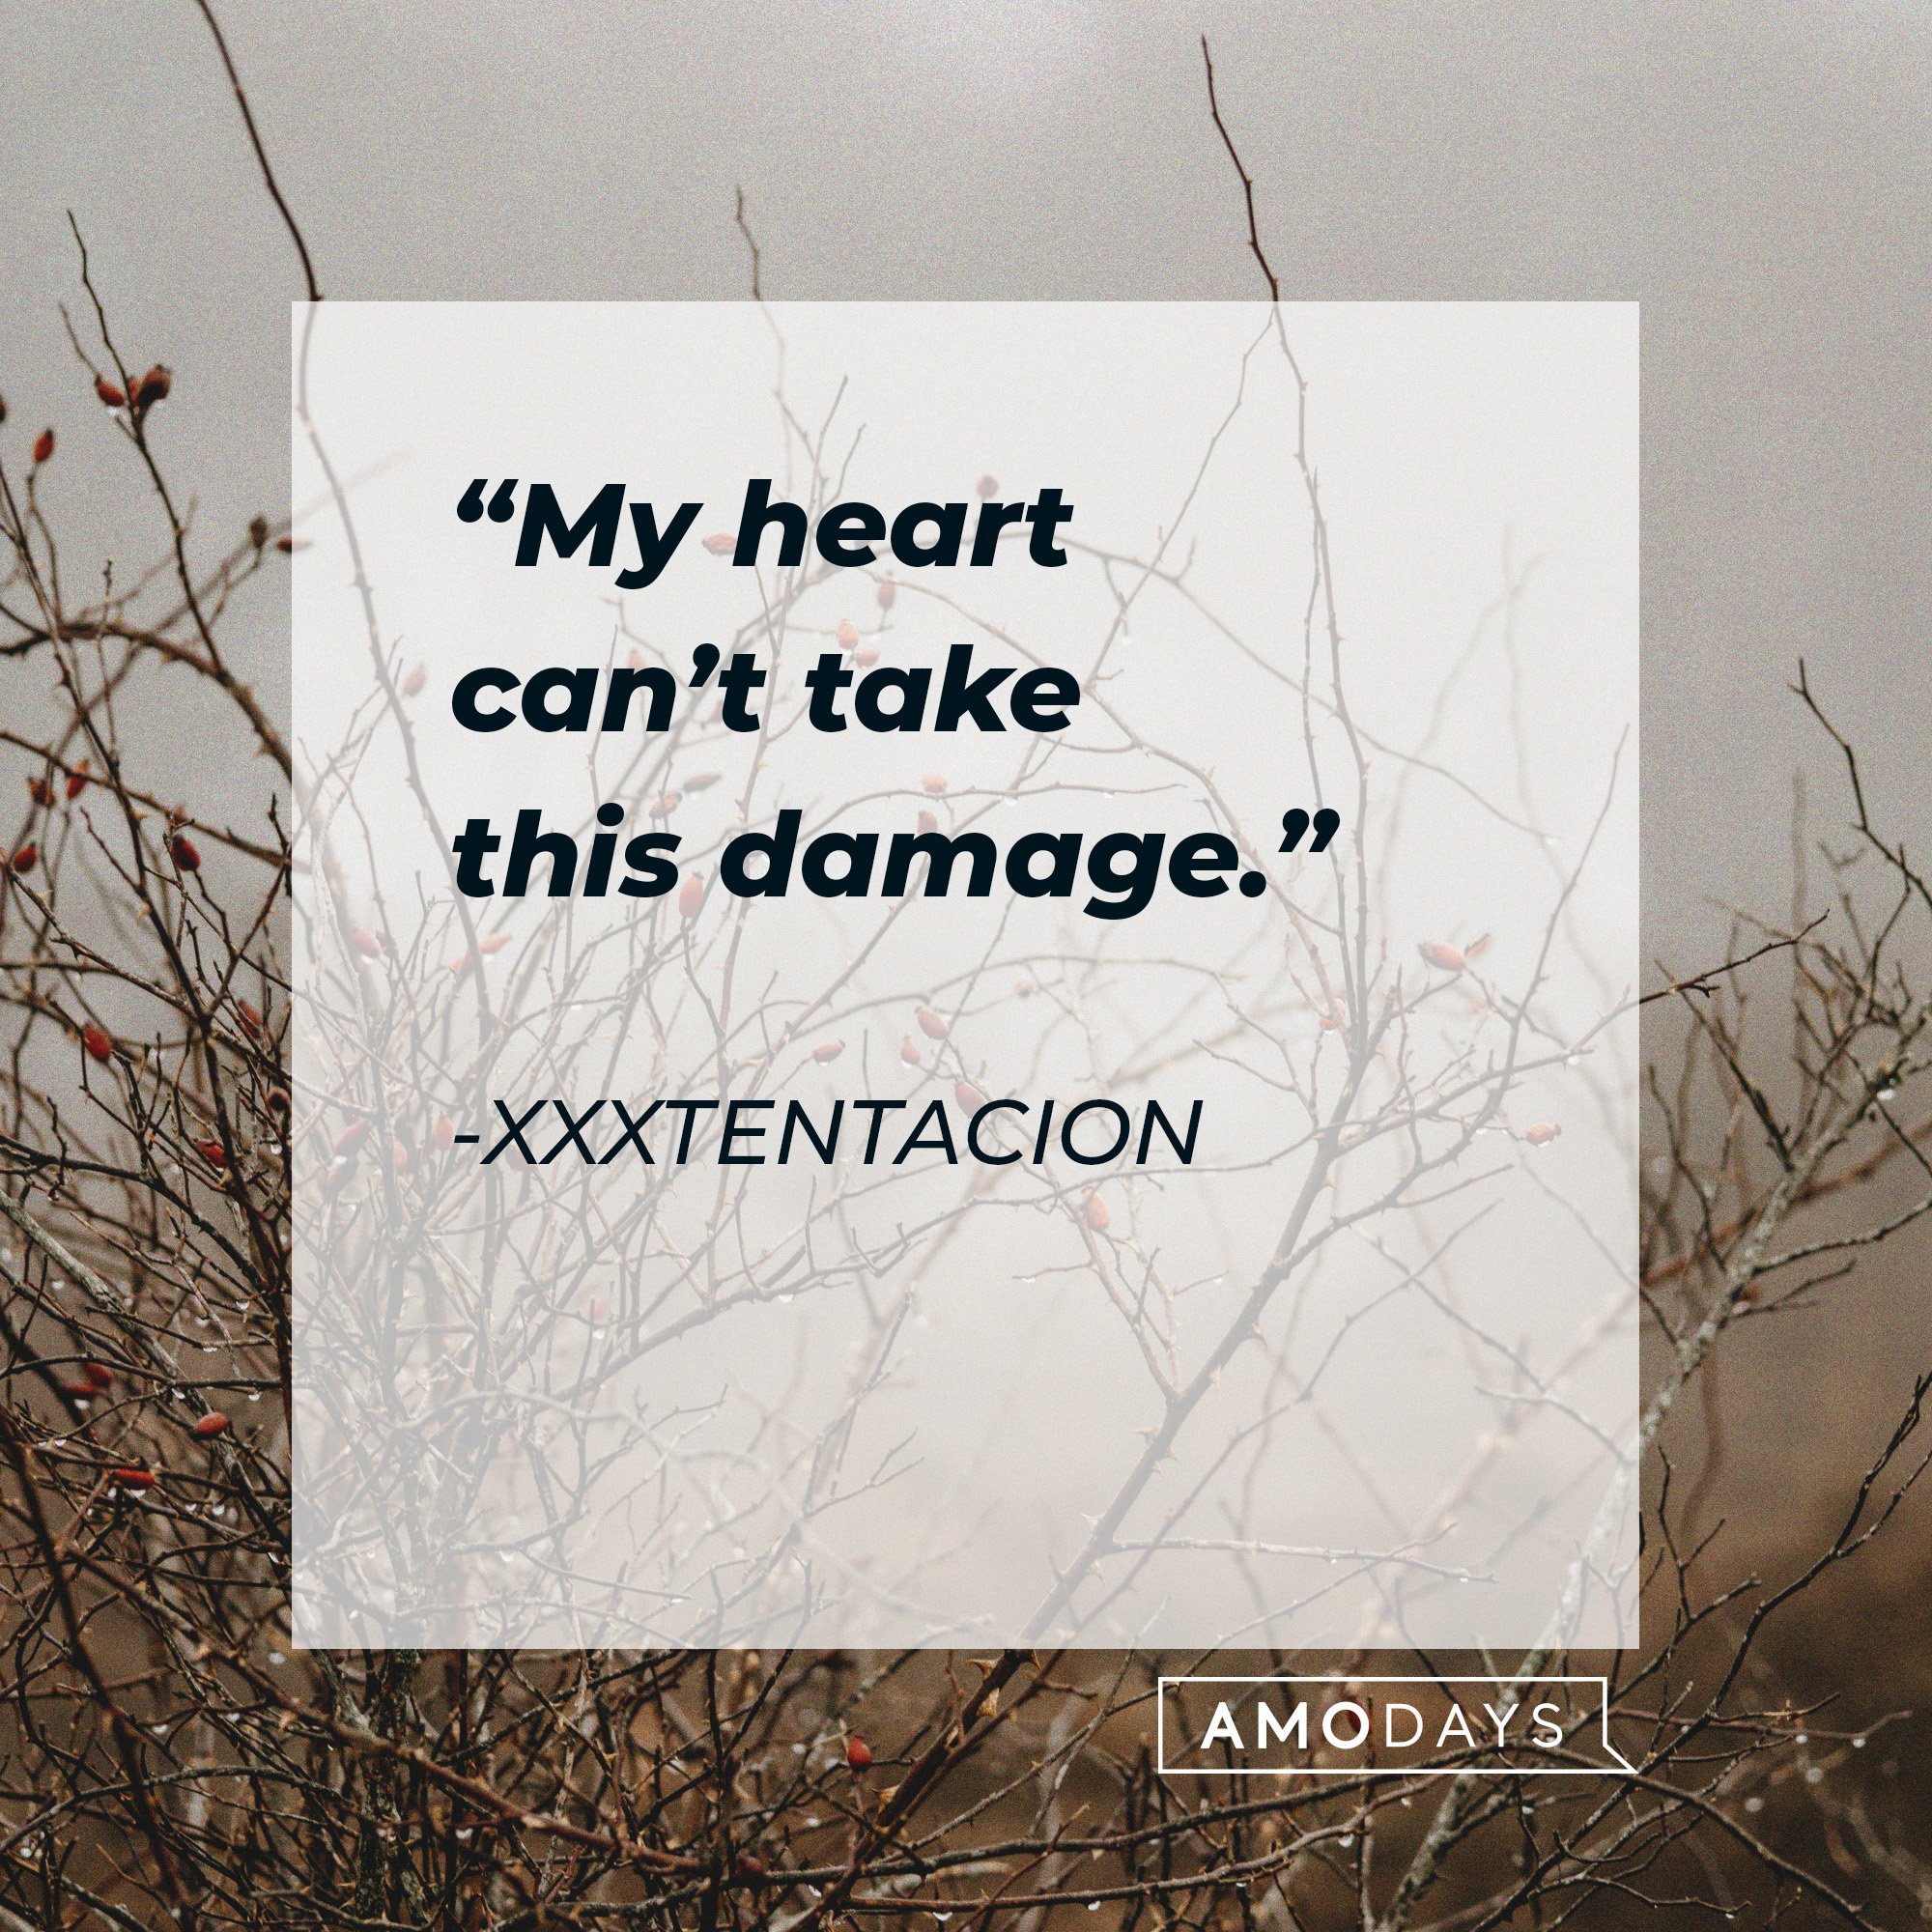 Xxxtentacion’s quote: “My heart can’t take this damage.” | Image: AmoDays